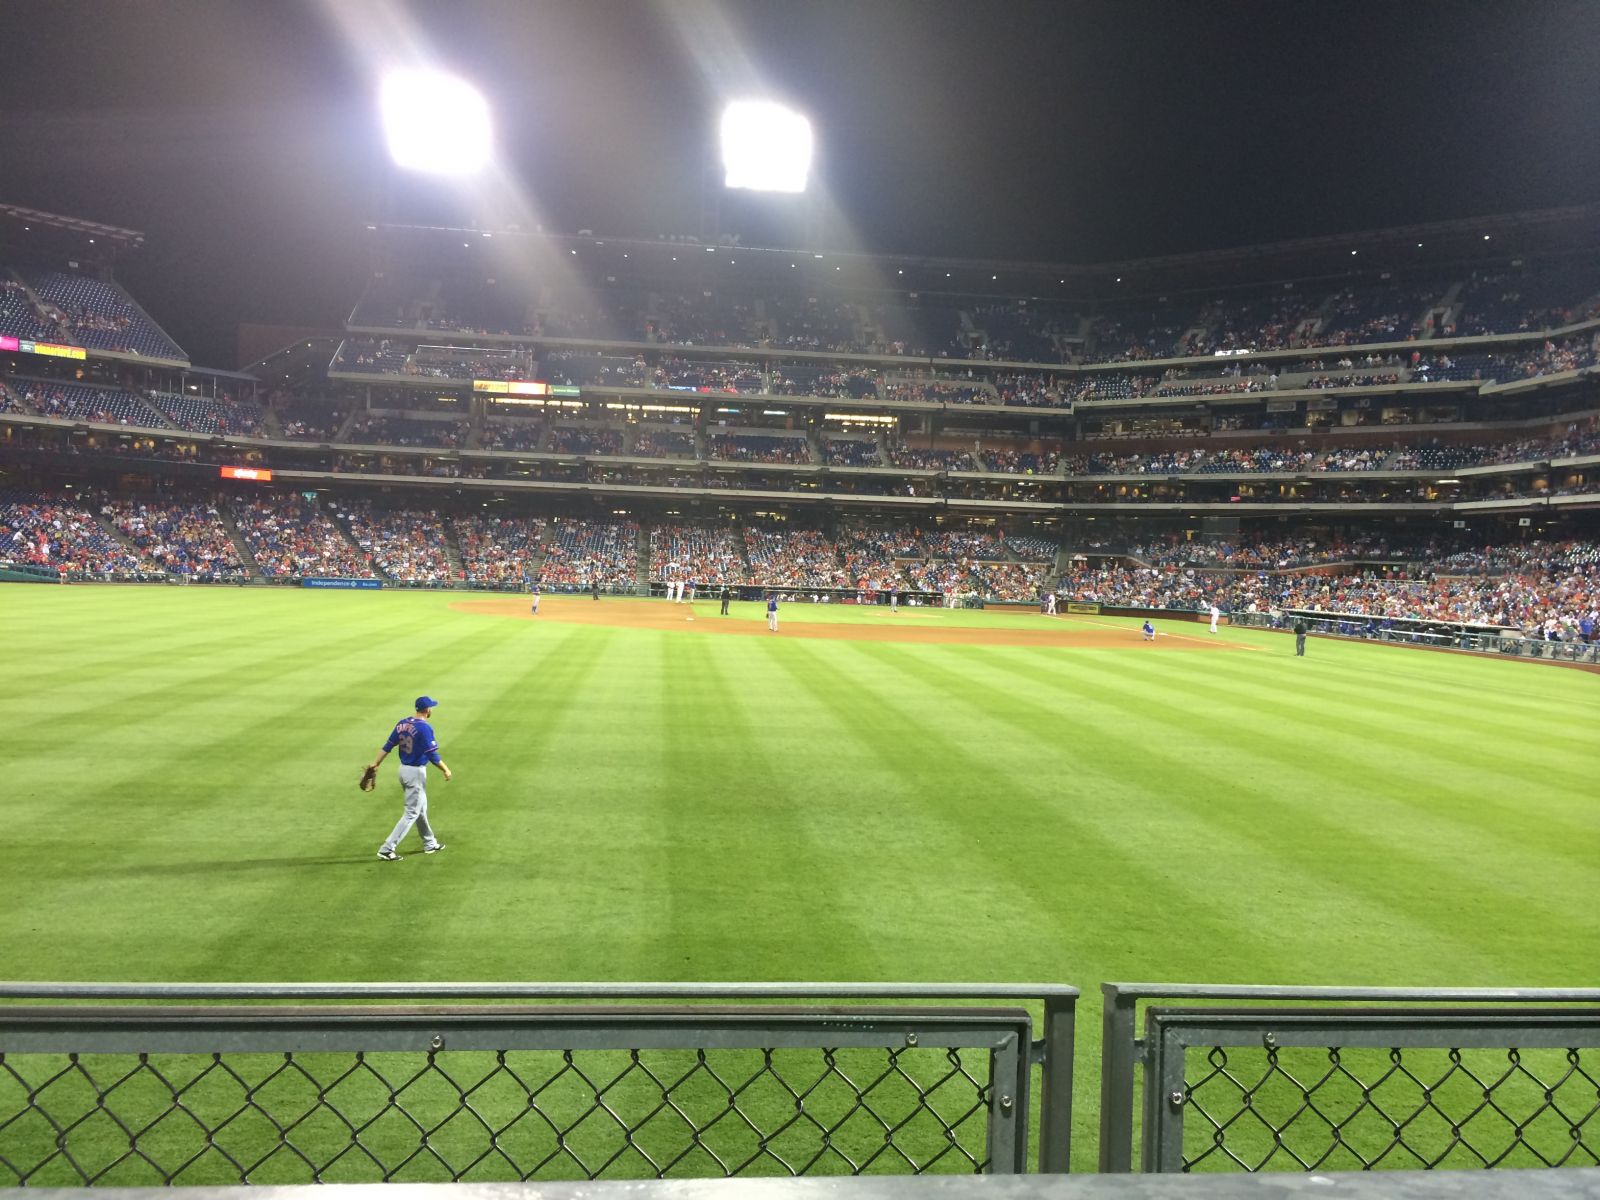 section 143, row 1 seat view  for baseball - citizens bank park